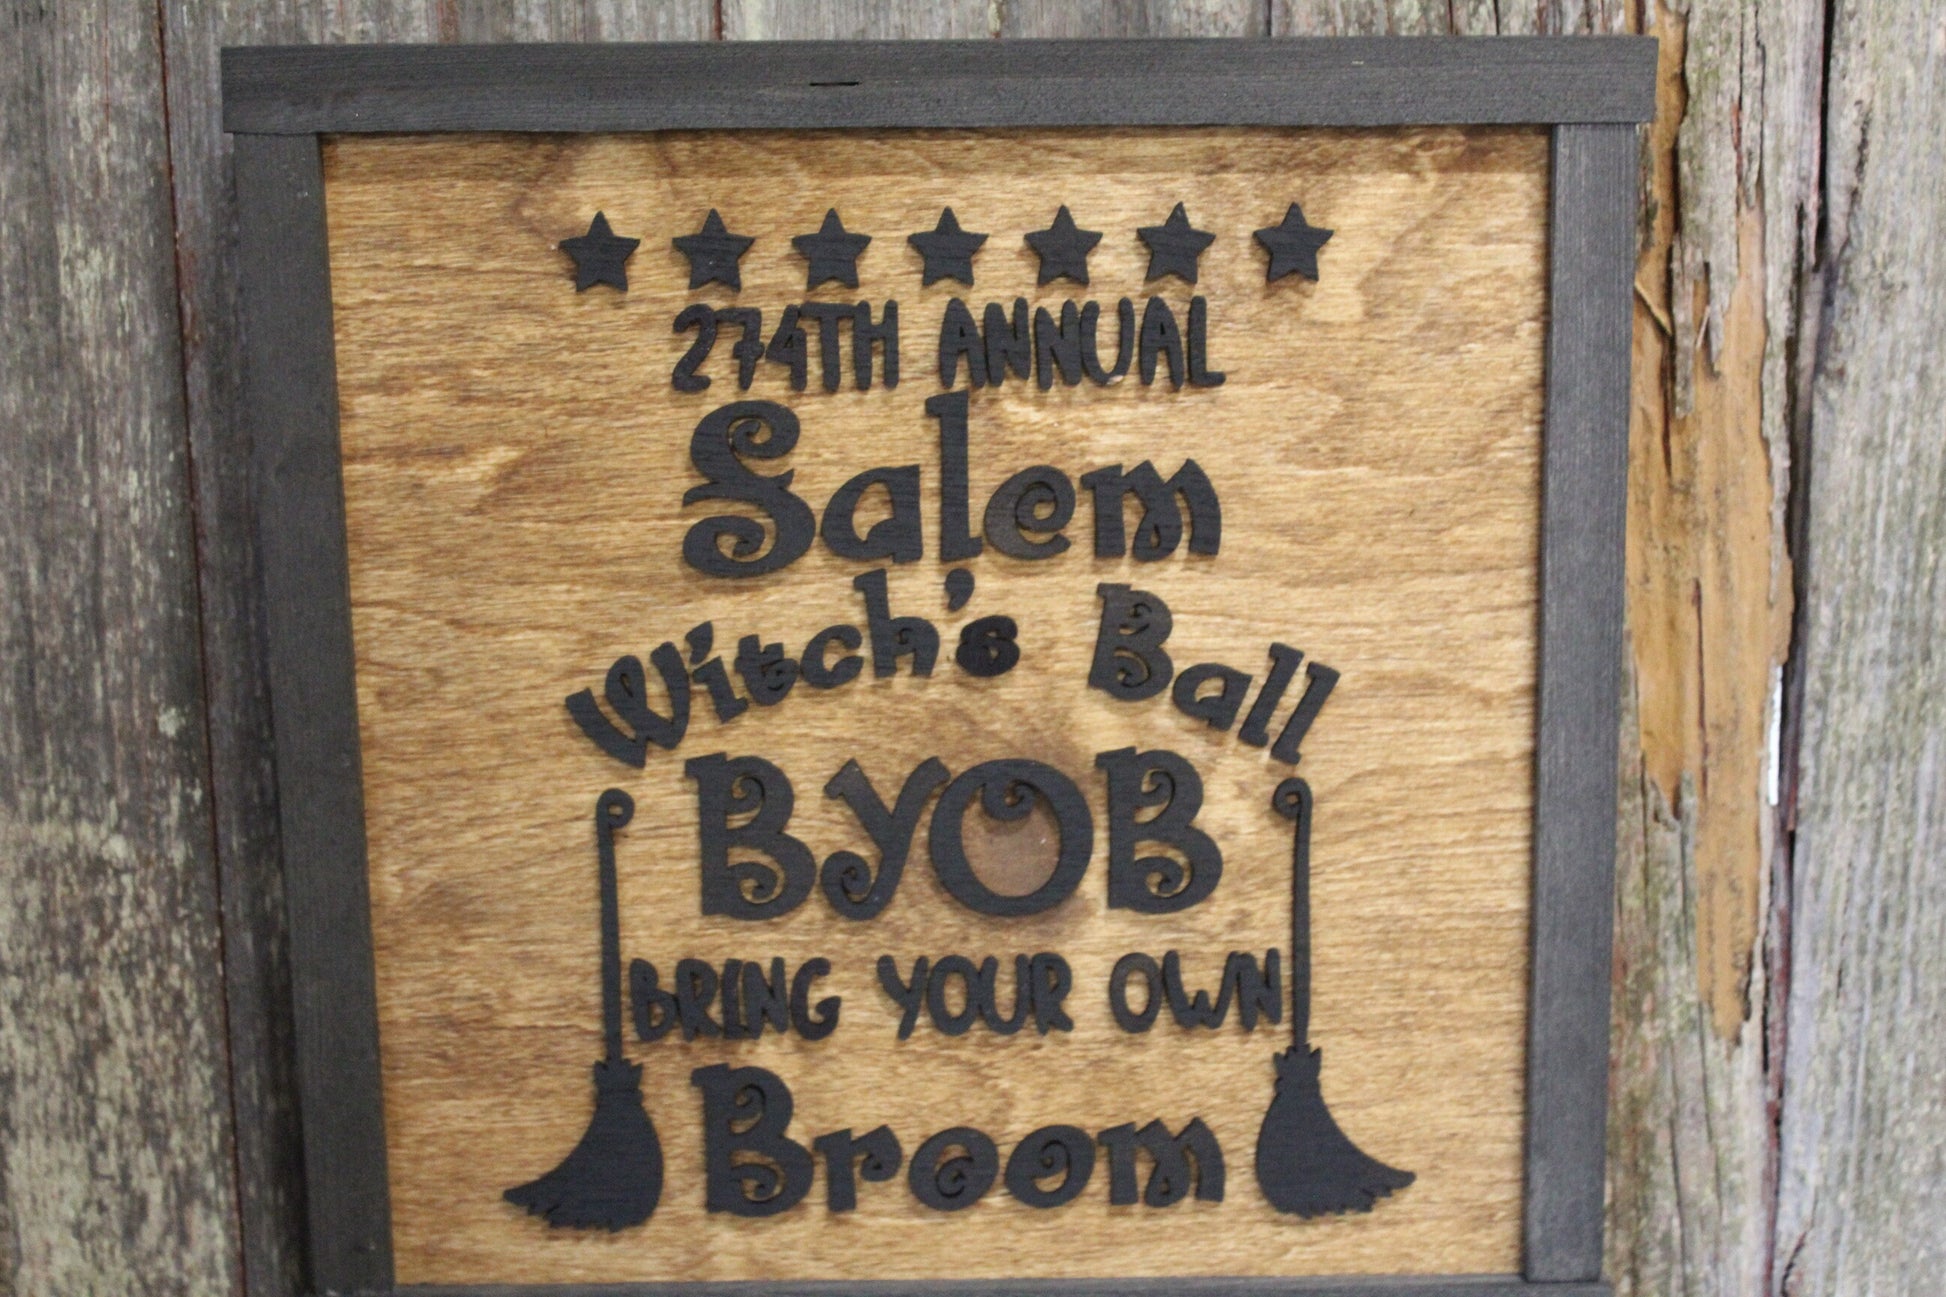 Salem Cat Halloween Party Sign BYOB Witches Ball Bring Your Own Broom Wall Decoration Art 3D Raised Text Country Funny Fall Decor Hanging